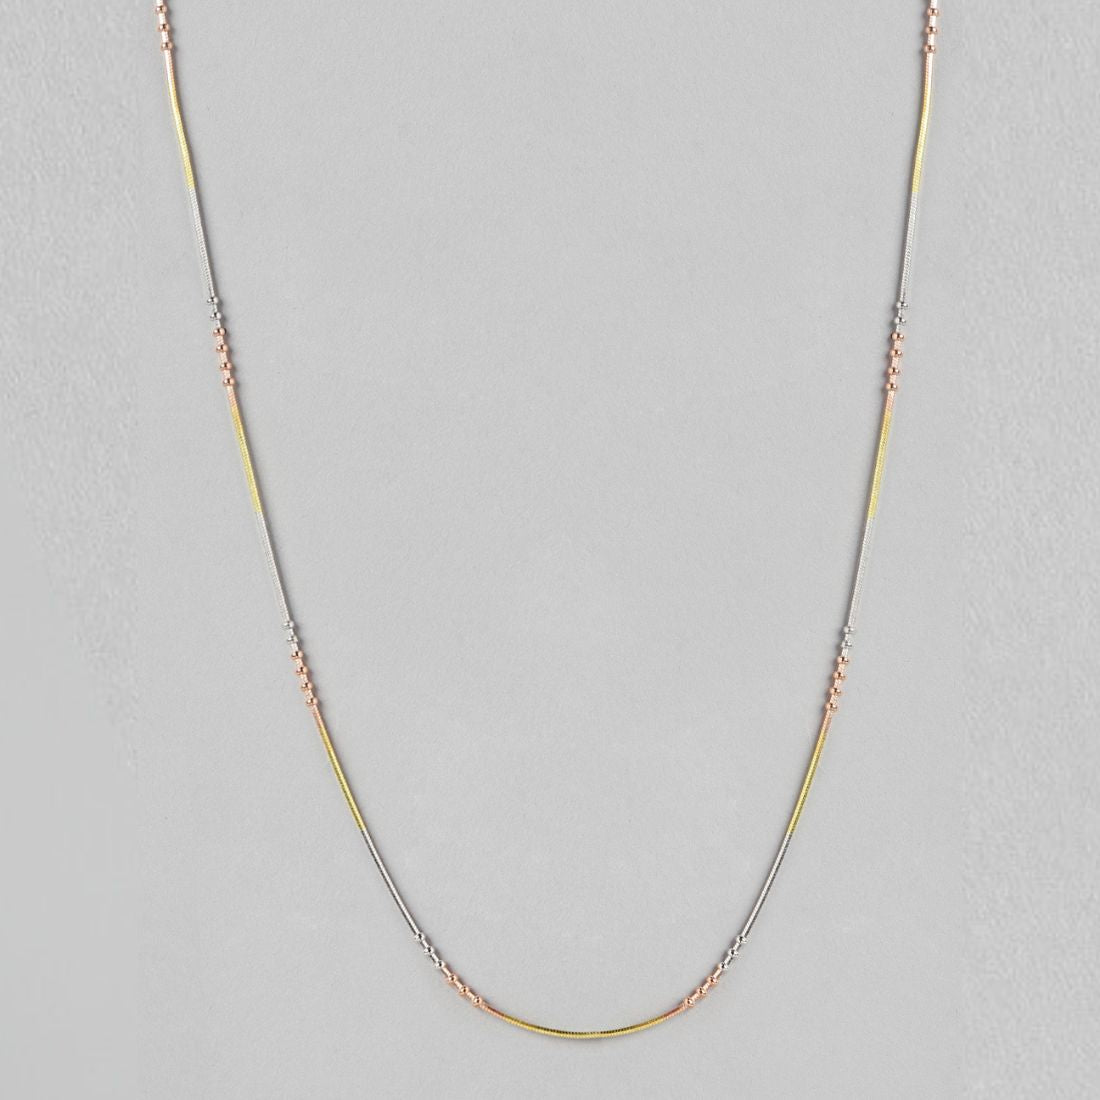 Trilogy of Radiance Triple Tone Plated 925 Sterling Silver Chain